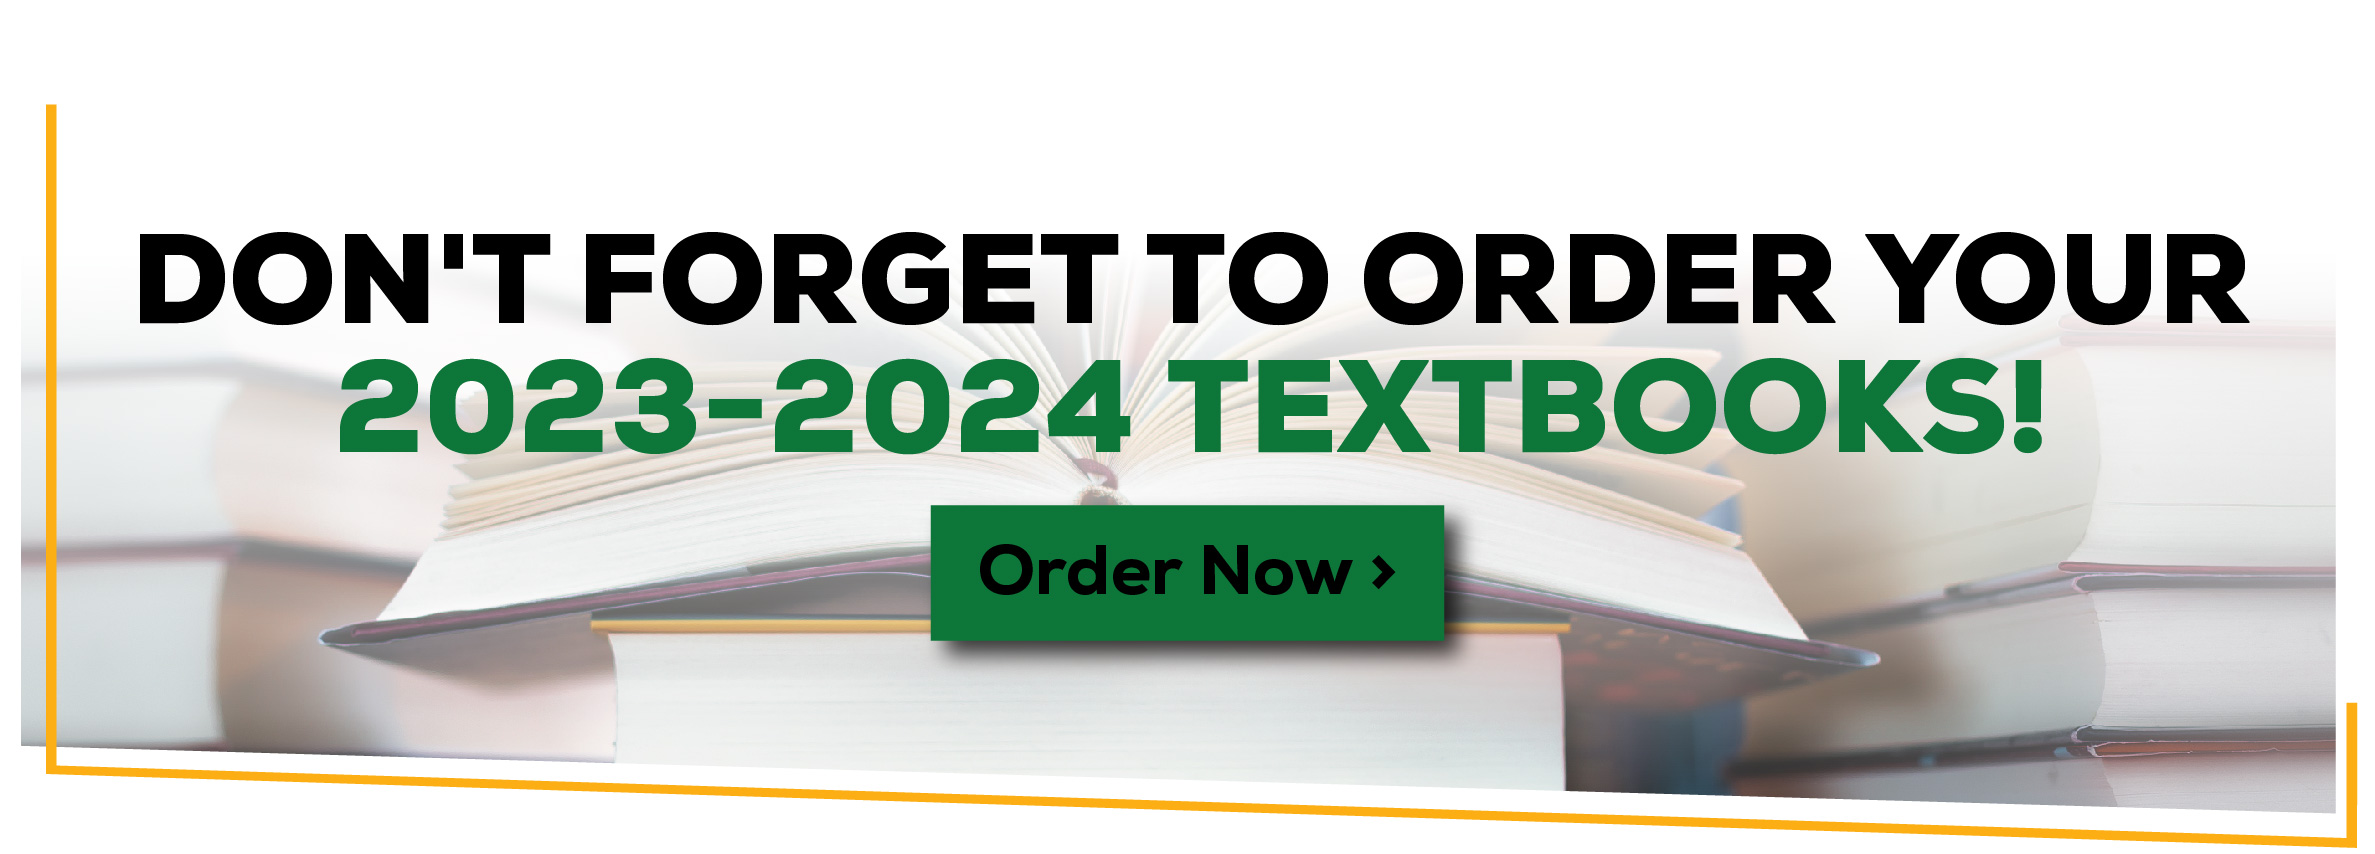 Don't forget to order your textbooks!